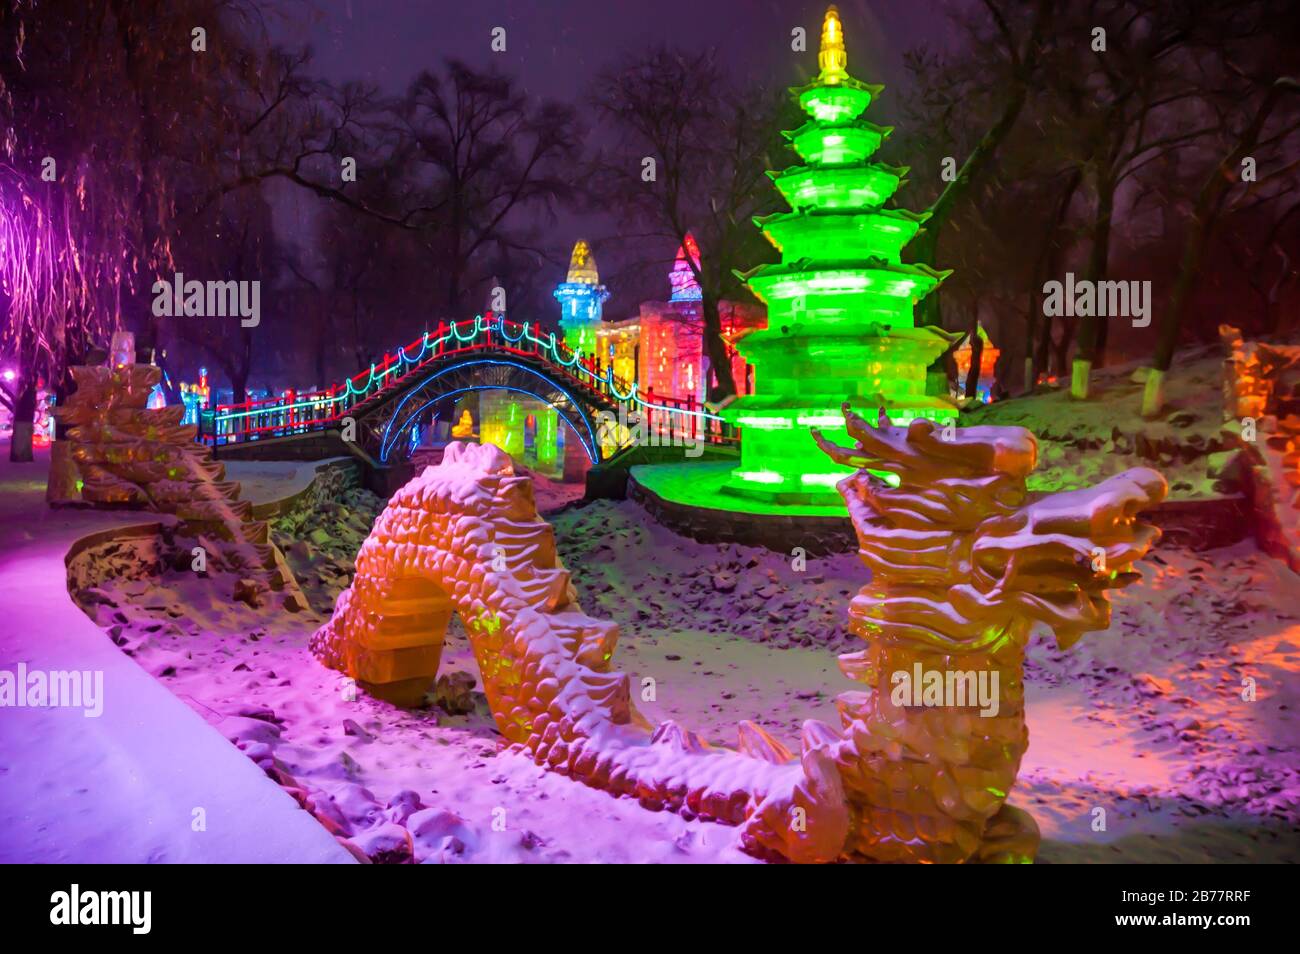 Ice sculptures illuminated in the early evening in Harbin’s Zhaolin Park. Stock Photo